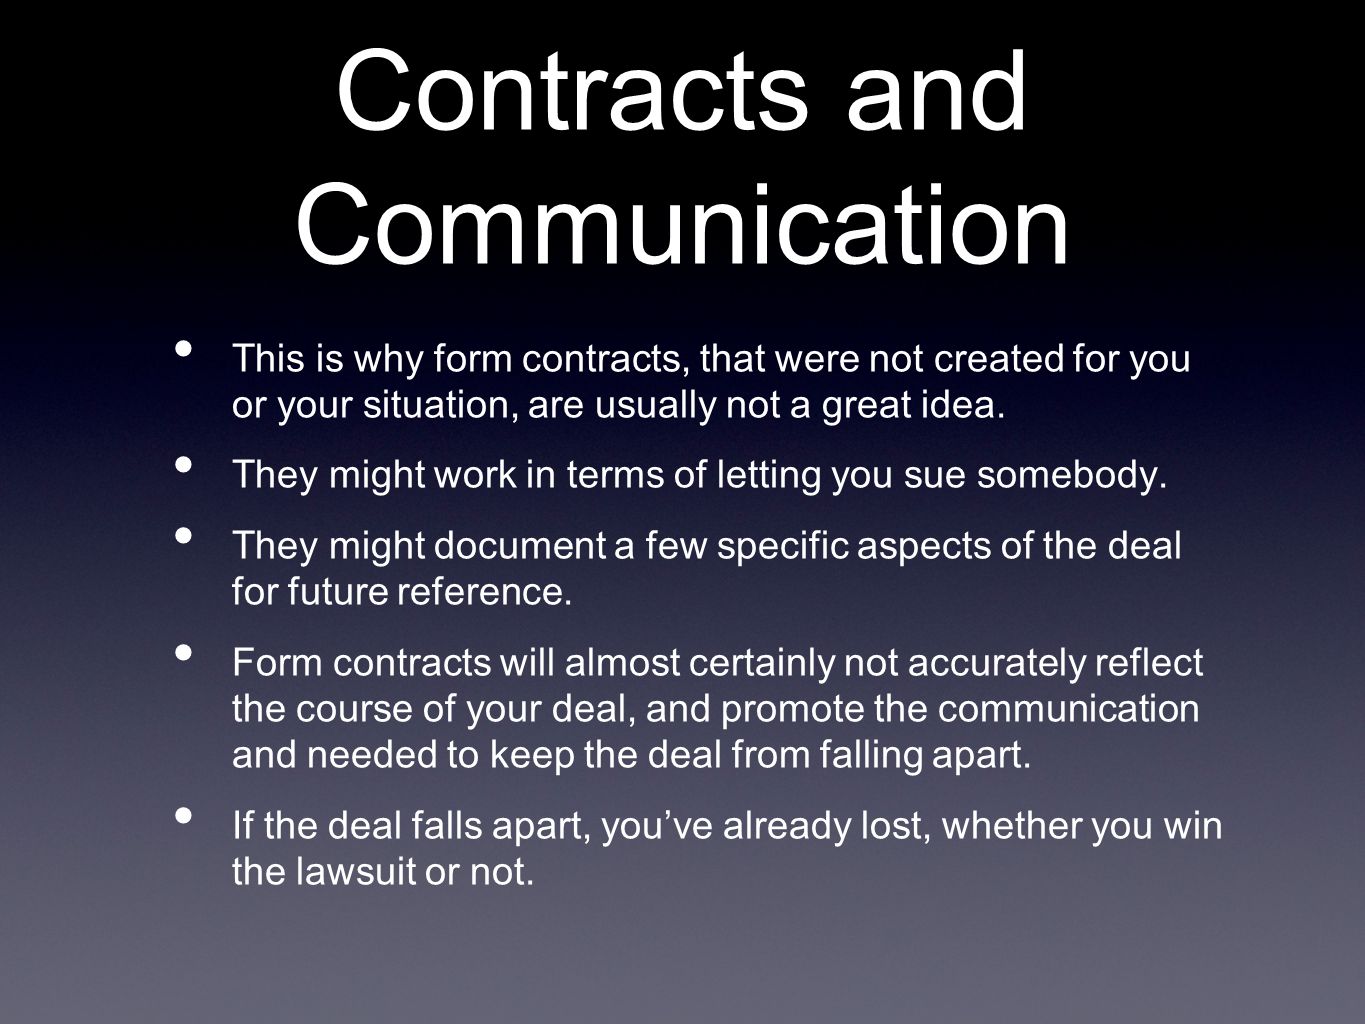 Contracts and Communication This is why form contracts, that were not created for you or your situation, are usually not a great idea.